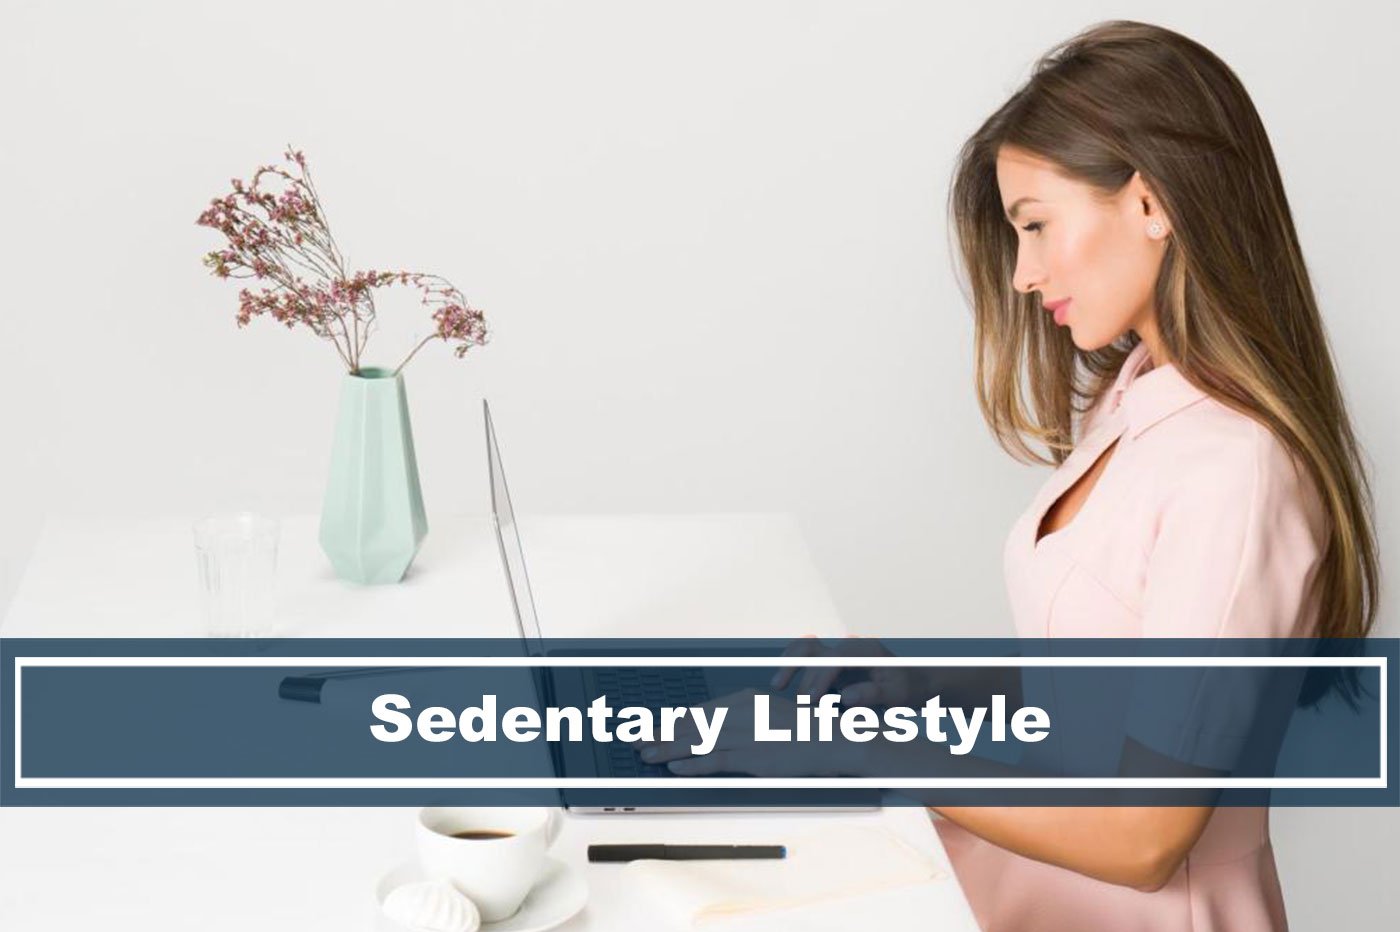 Sedentary Lifestyle Health Risks and Concerns